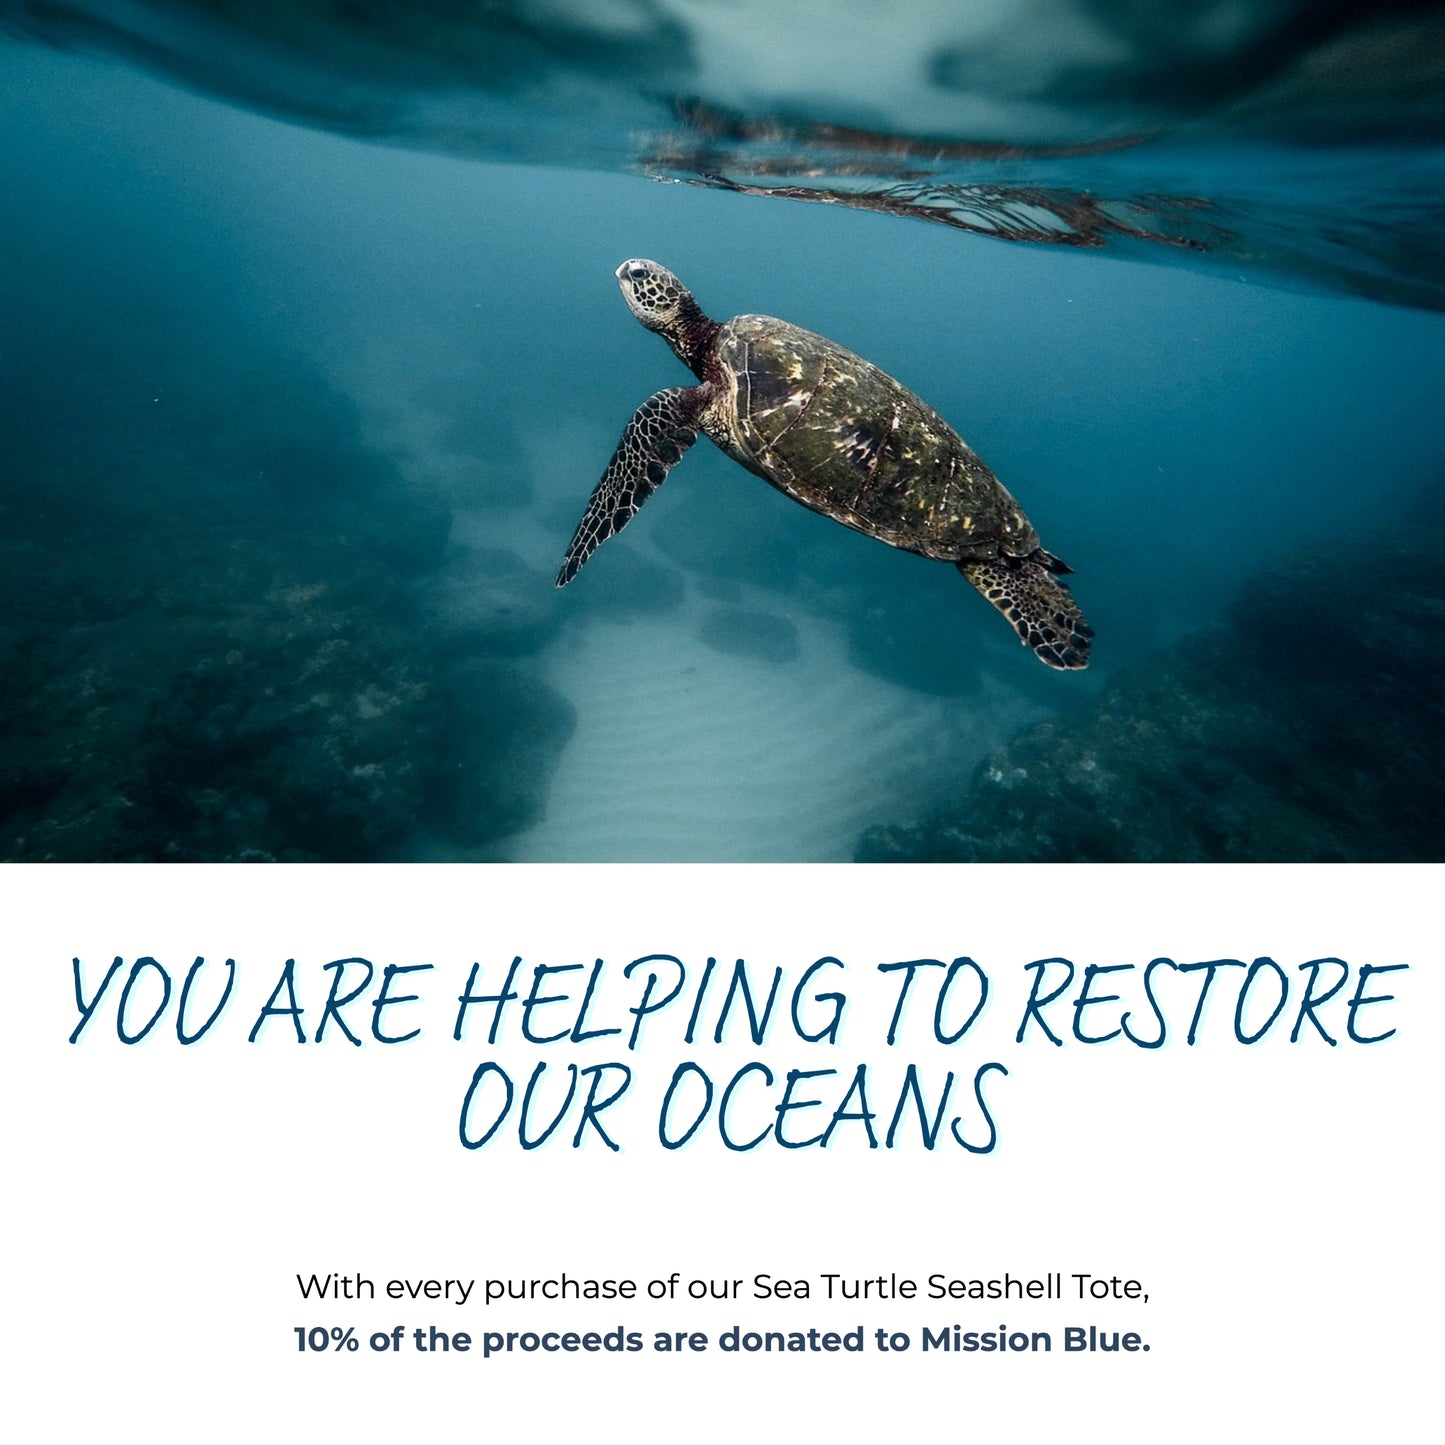 You are helping to restore our oceans. With every purchase of our Sea Turtle Seashell Tote Bag, 10% of the net proceeds are donated to Mission Blue to continue their efforts in creating marine protected areas, or "Hope Spots"